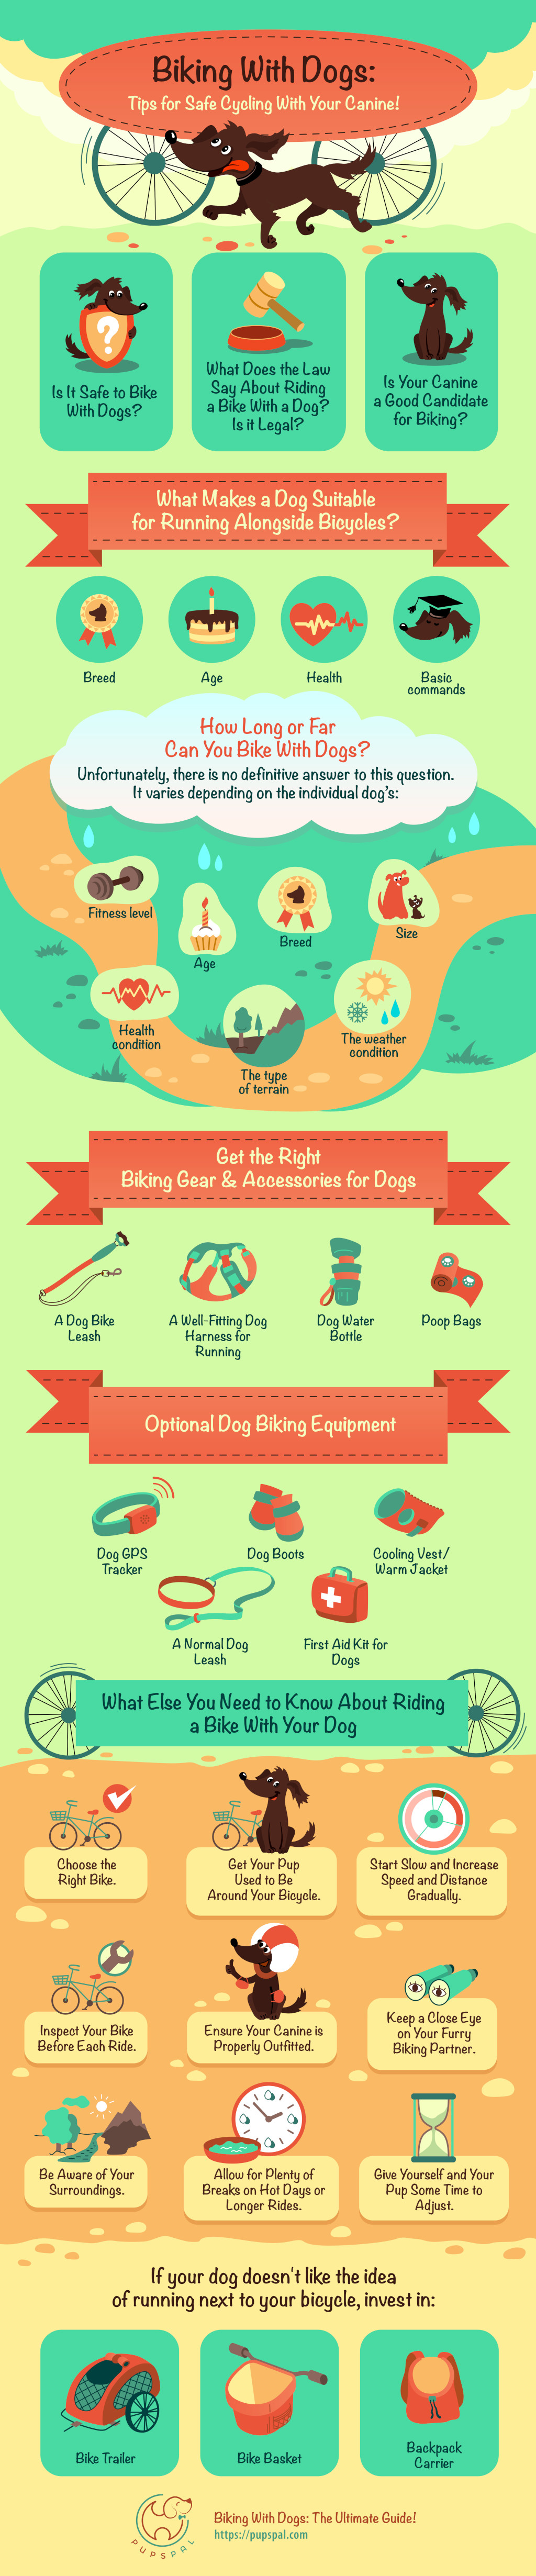 Infographic - Biking with dogs